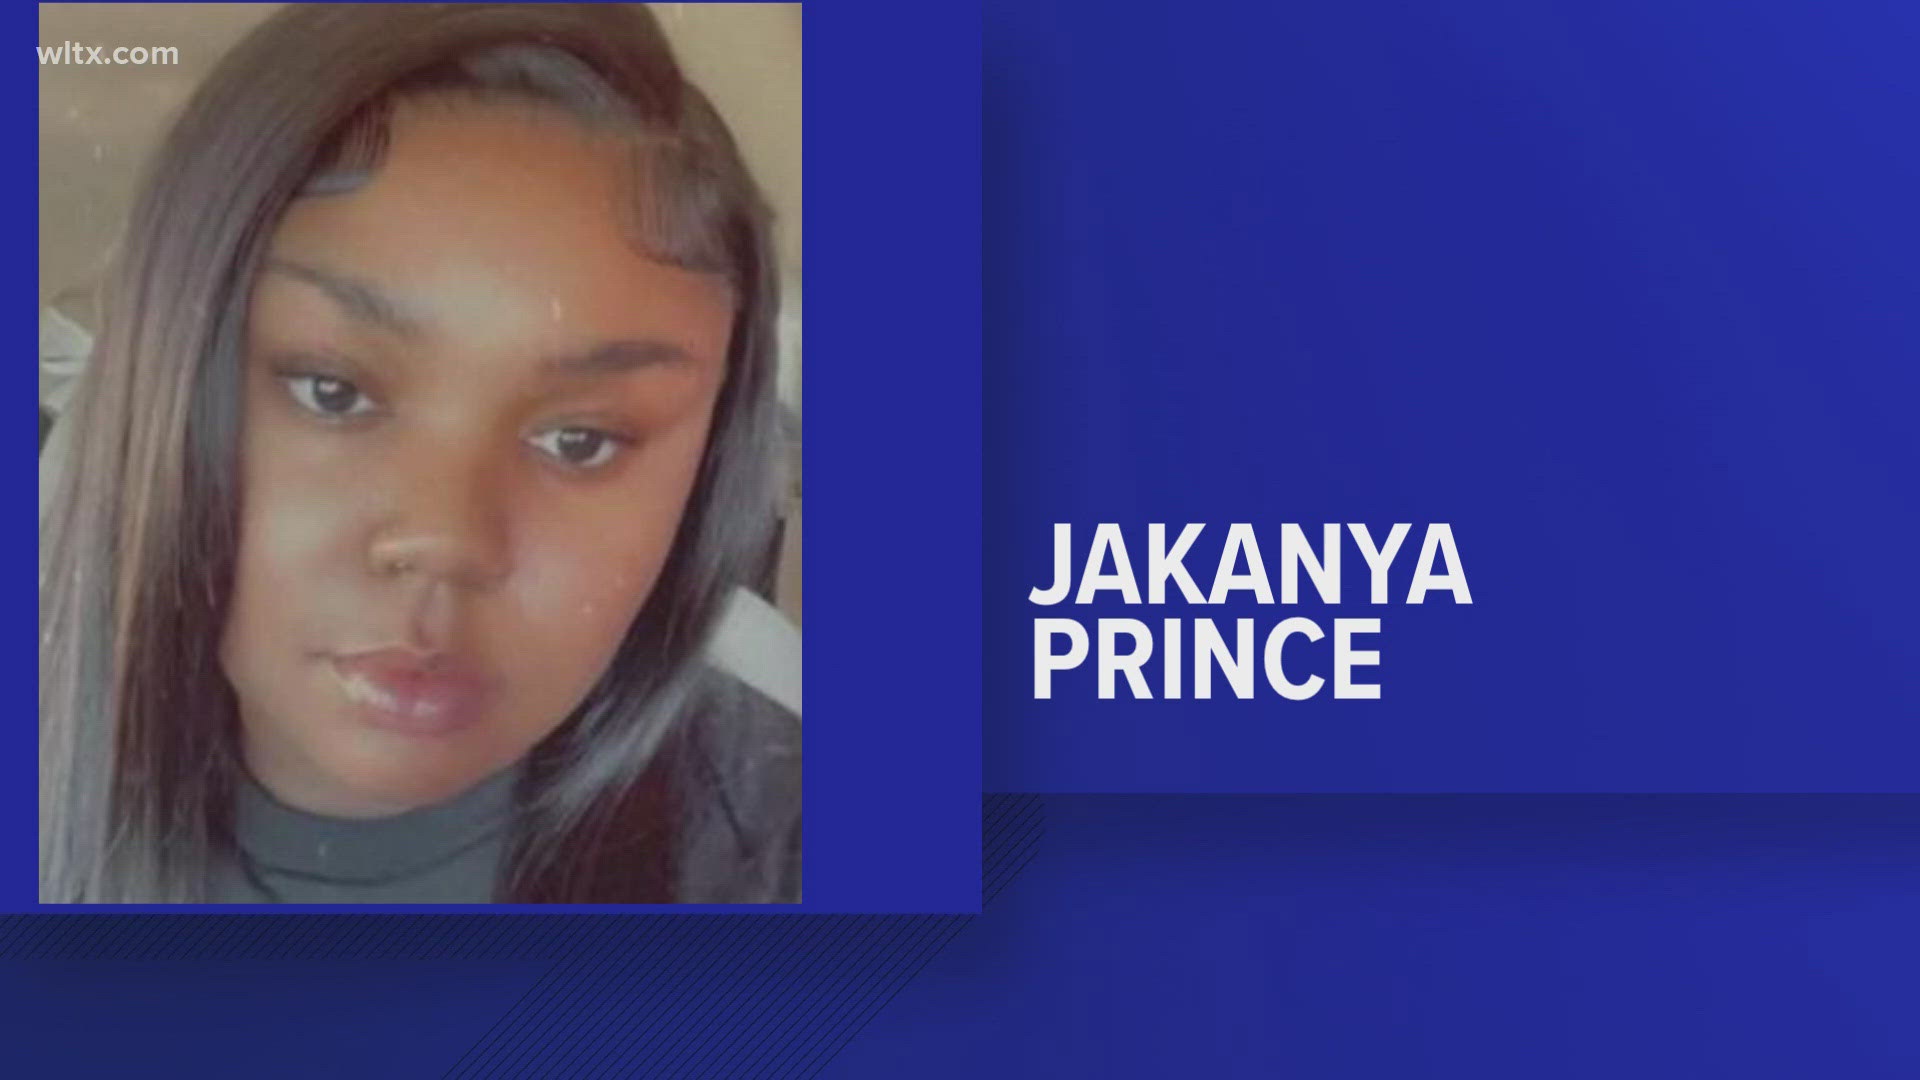 She's 19-year-old Jakanya prince, she was last seen near her home on Barwick road in Sumter.